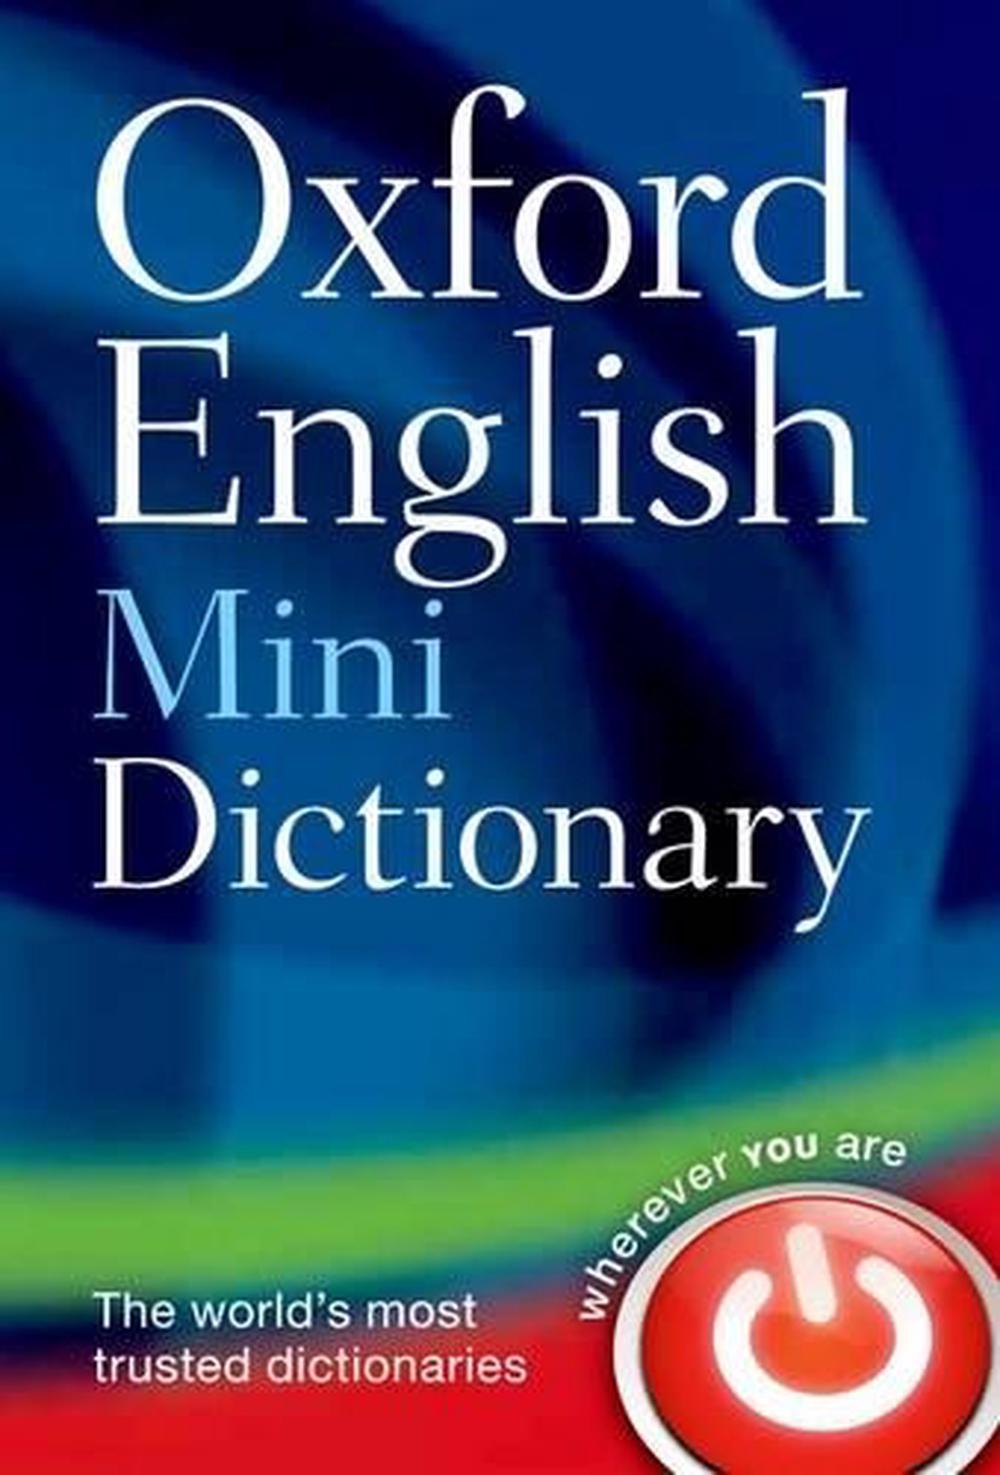 Oxford English Mini Dictionary by Oxford Dictionaries, Paperback